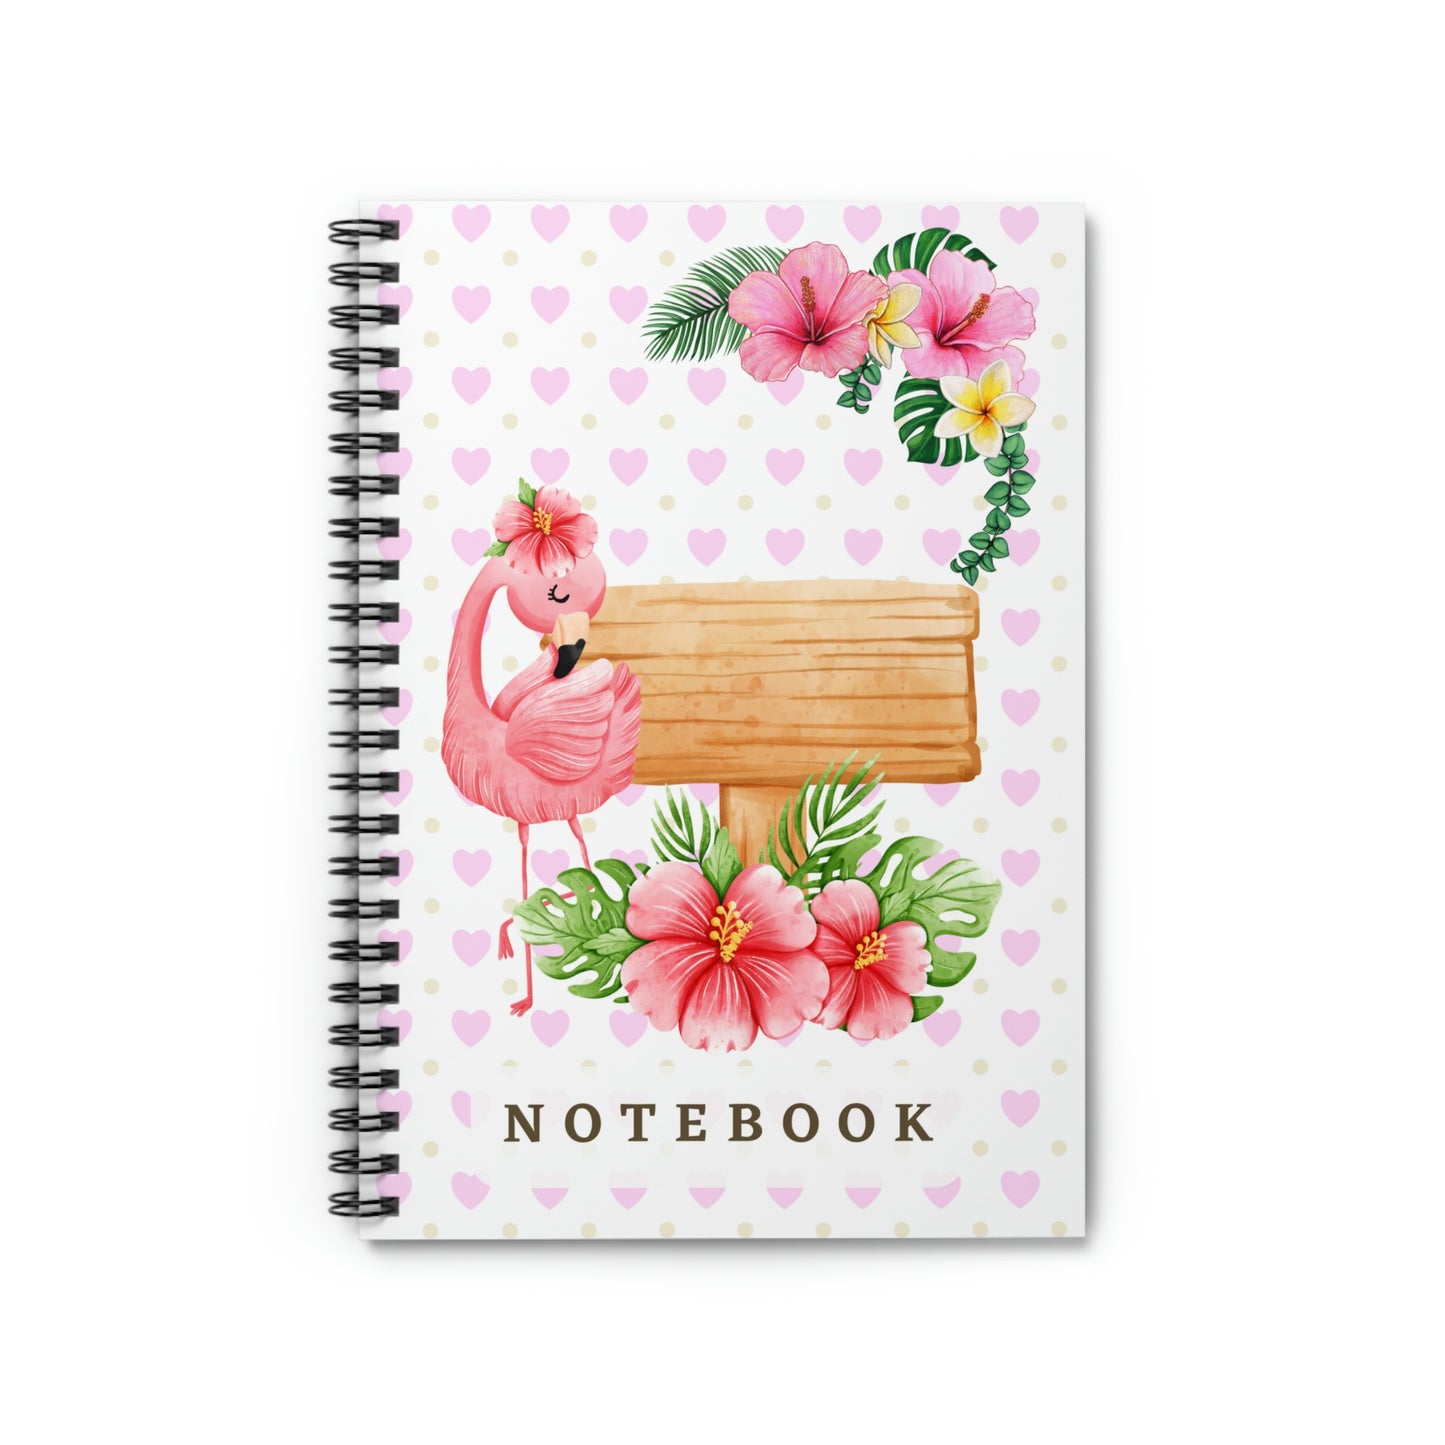 Cute Flamingo with Hibiscus design Spiral Notebook - Ruled Line 118 pages